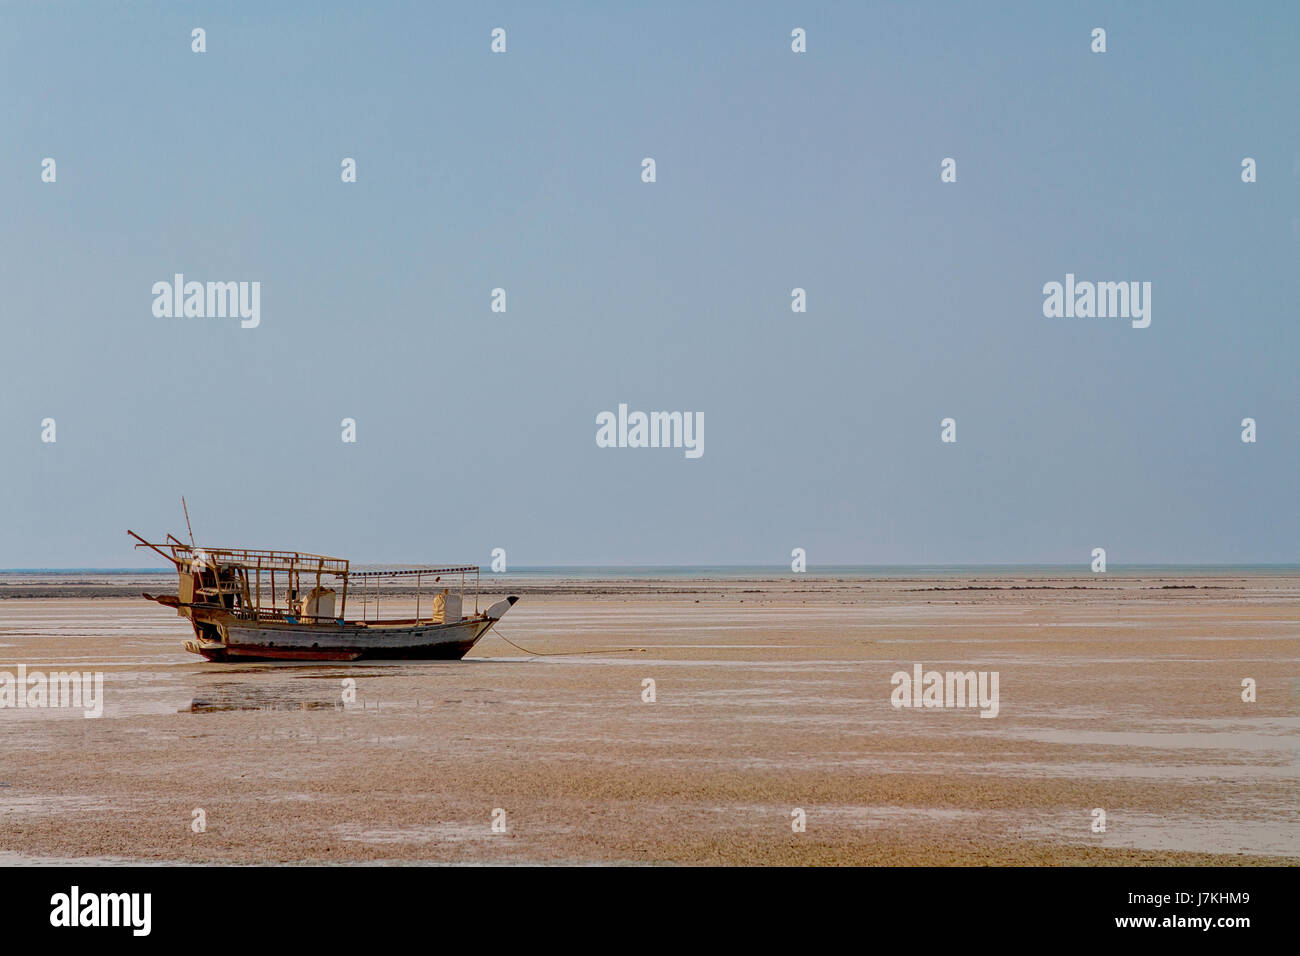 Traditional Dhow boat moored along the coastline during low tide in Al-Ruwais village, Qatar, Middle East. Stock Photo